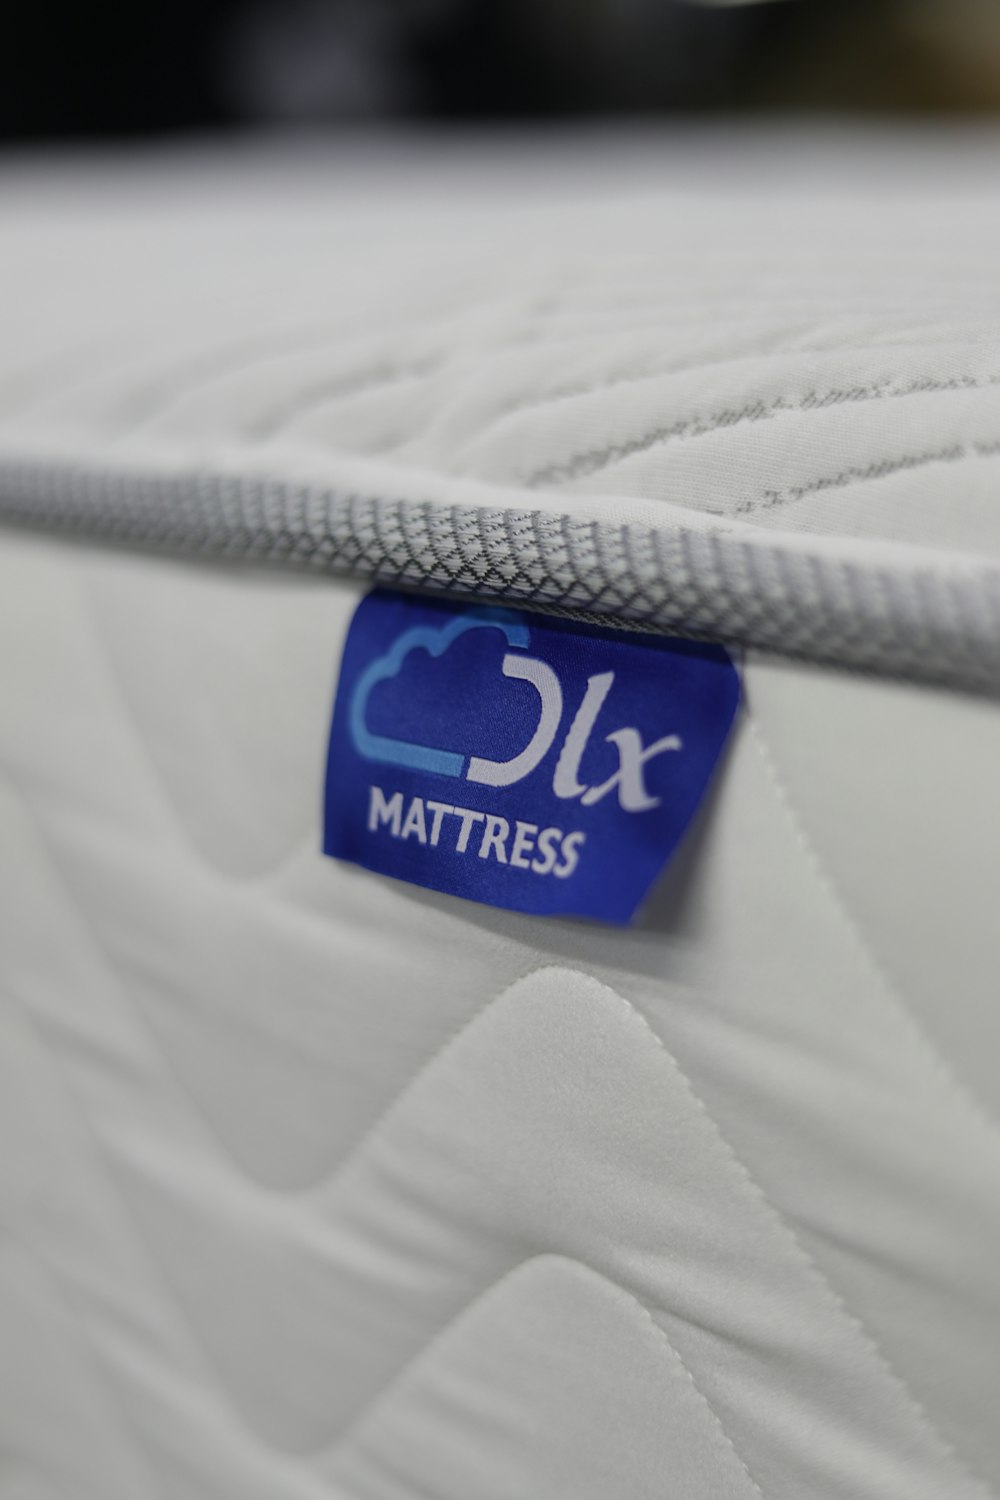 a mattress that has a label on it